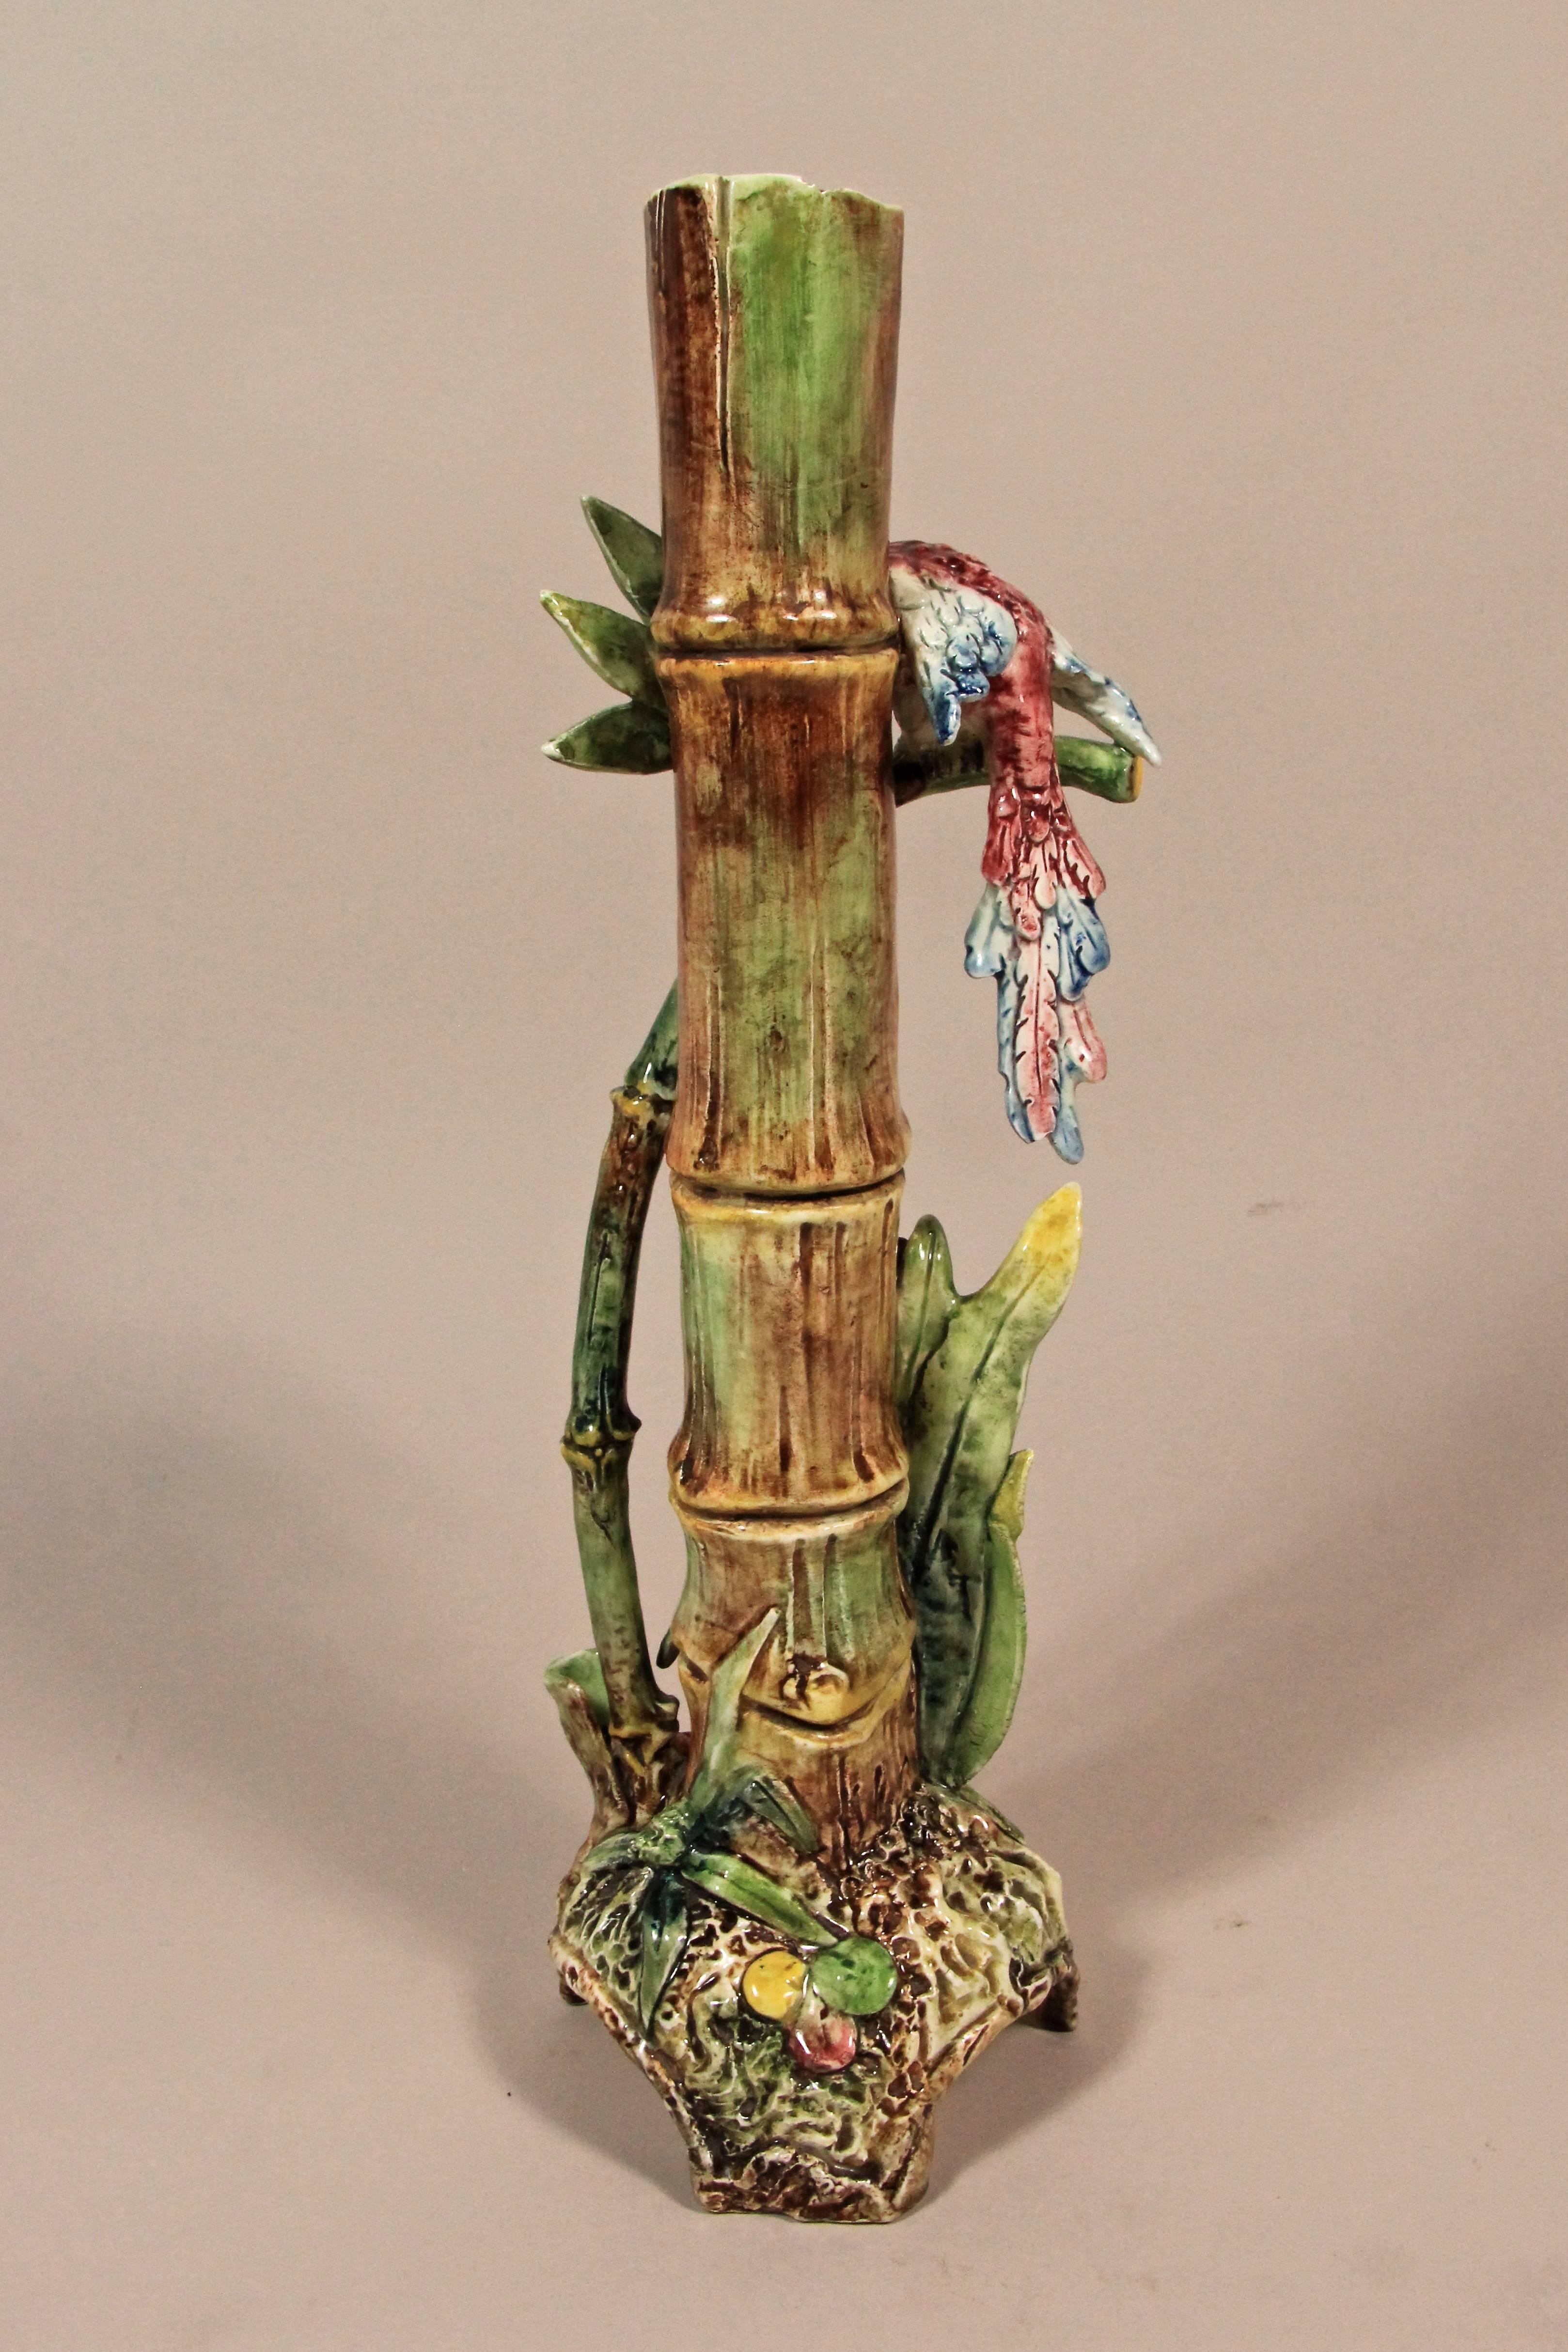 Hand-Painted Art Nouveau Vase Caribbean Style, Attributed to Znaimo, Cz, circa 1900